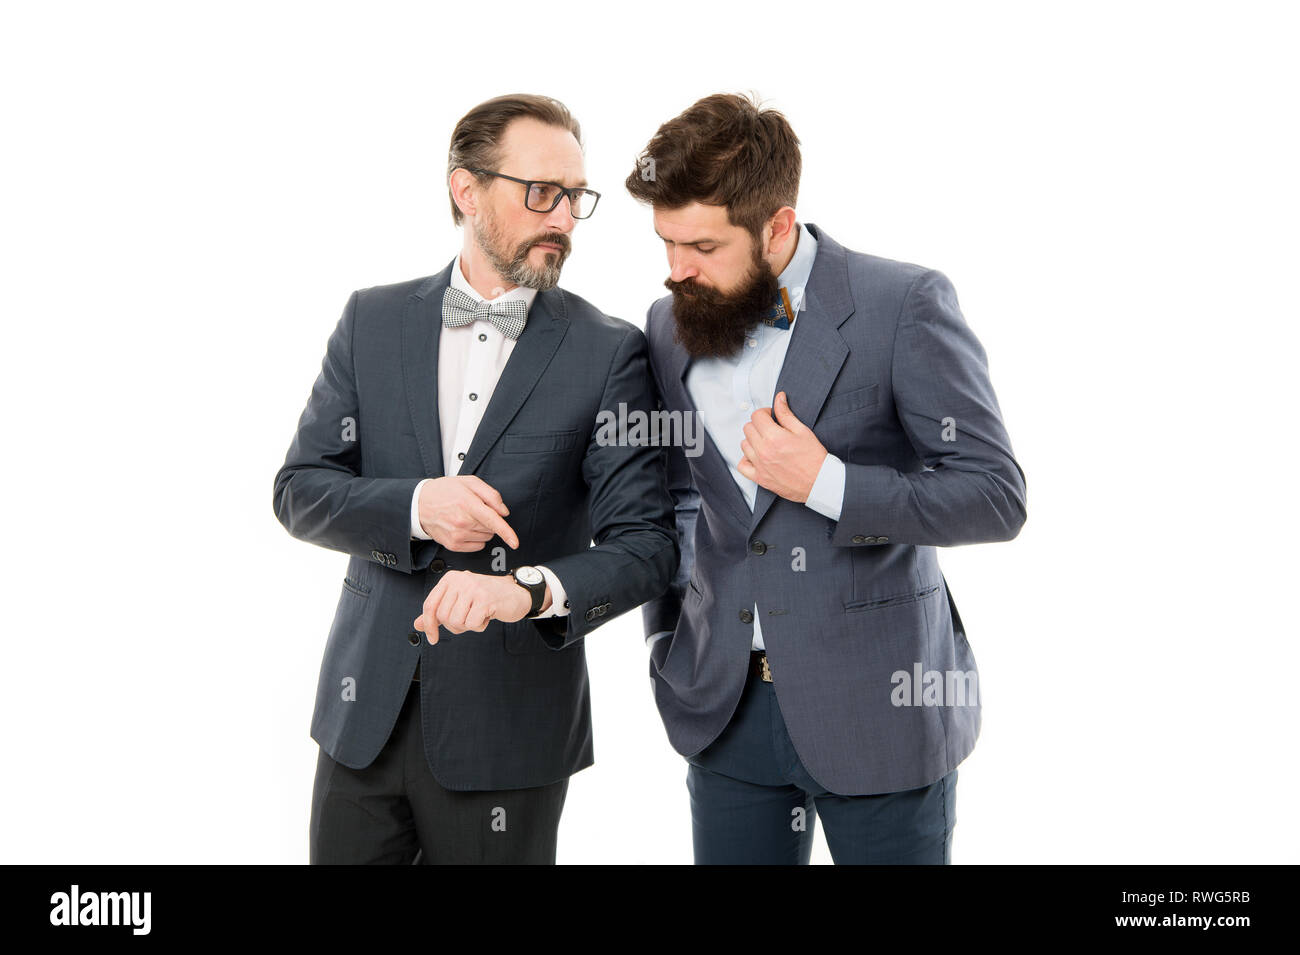 Check clock. Business people formal clothes having different opinion about time. Time management and discipline. Improve punctuality. Man mature experienced with clock care about time efficiency. Stock Photo